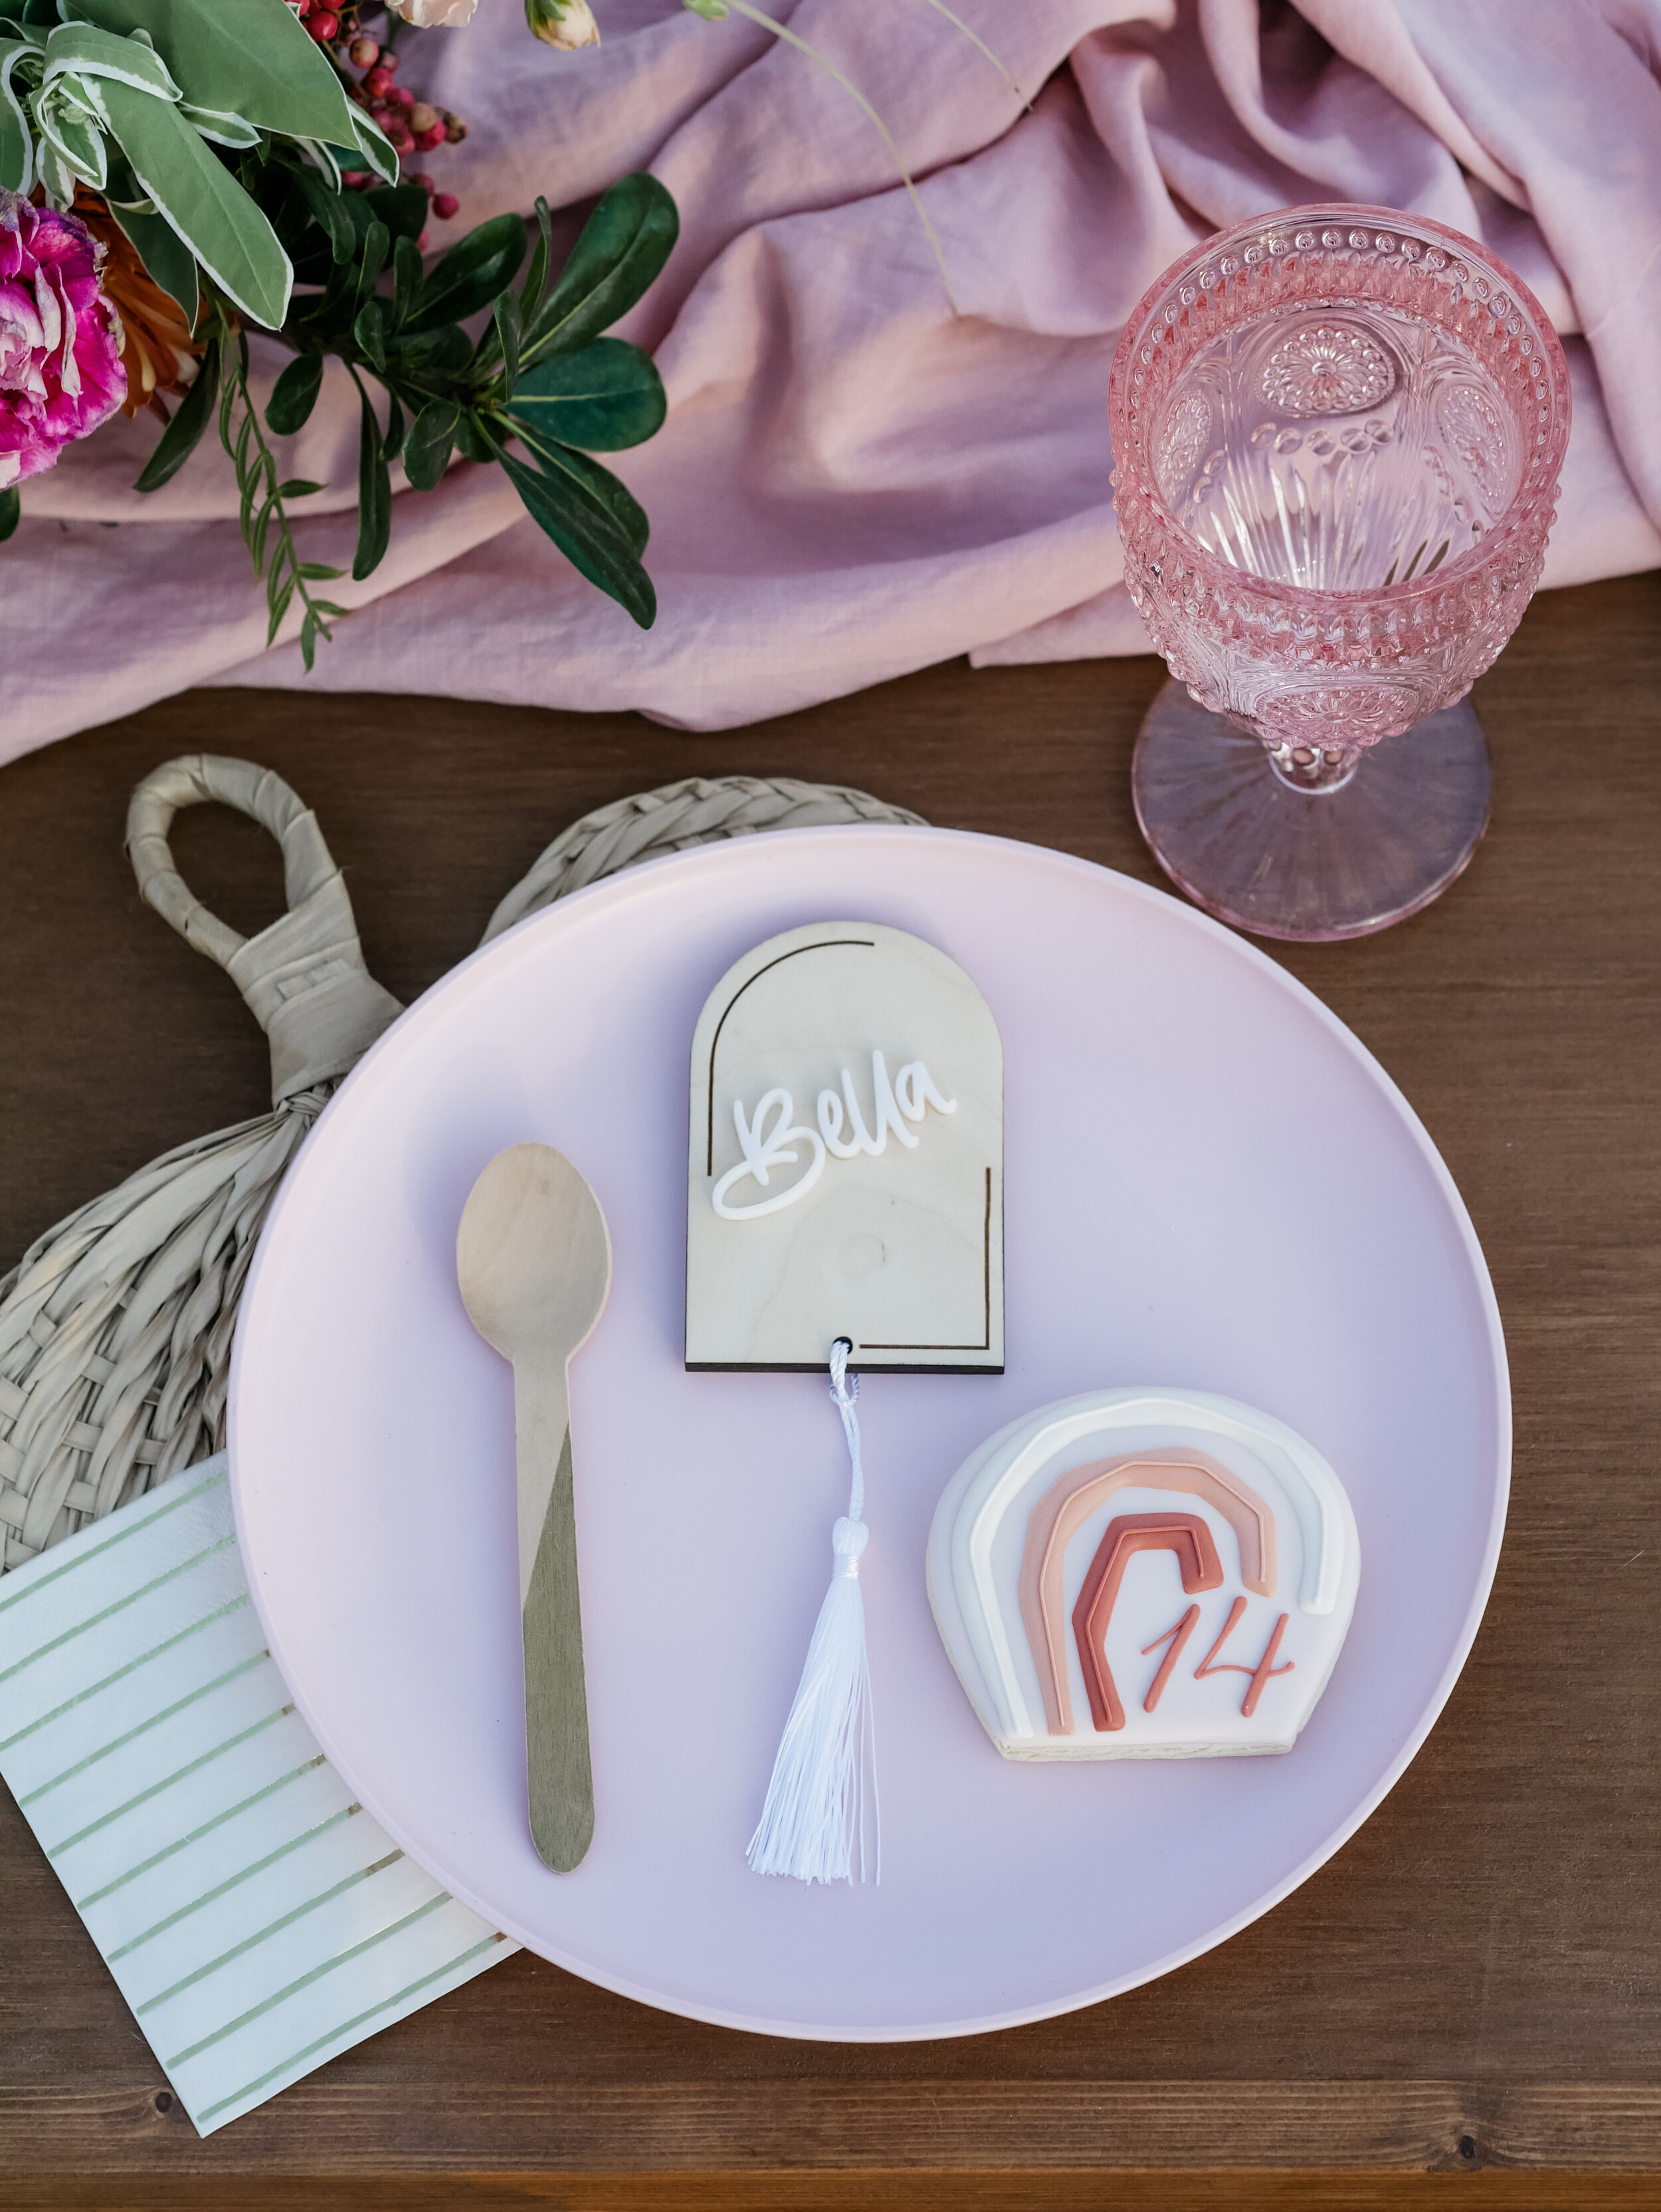  Boho chic place settings for a luxury backyard Glamping experience - with large rentable tent and picnic area from MINT Event Design in Austin, TX! Perfect for teen slumber parties, birthday parties, or bachelorette parties. See how event designer C